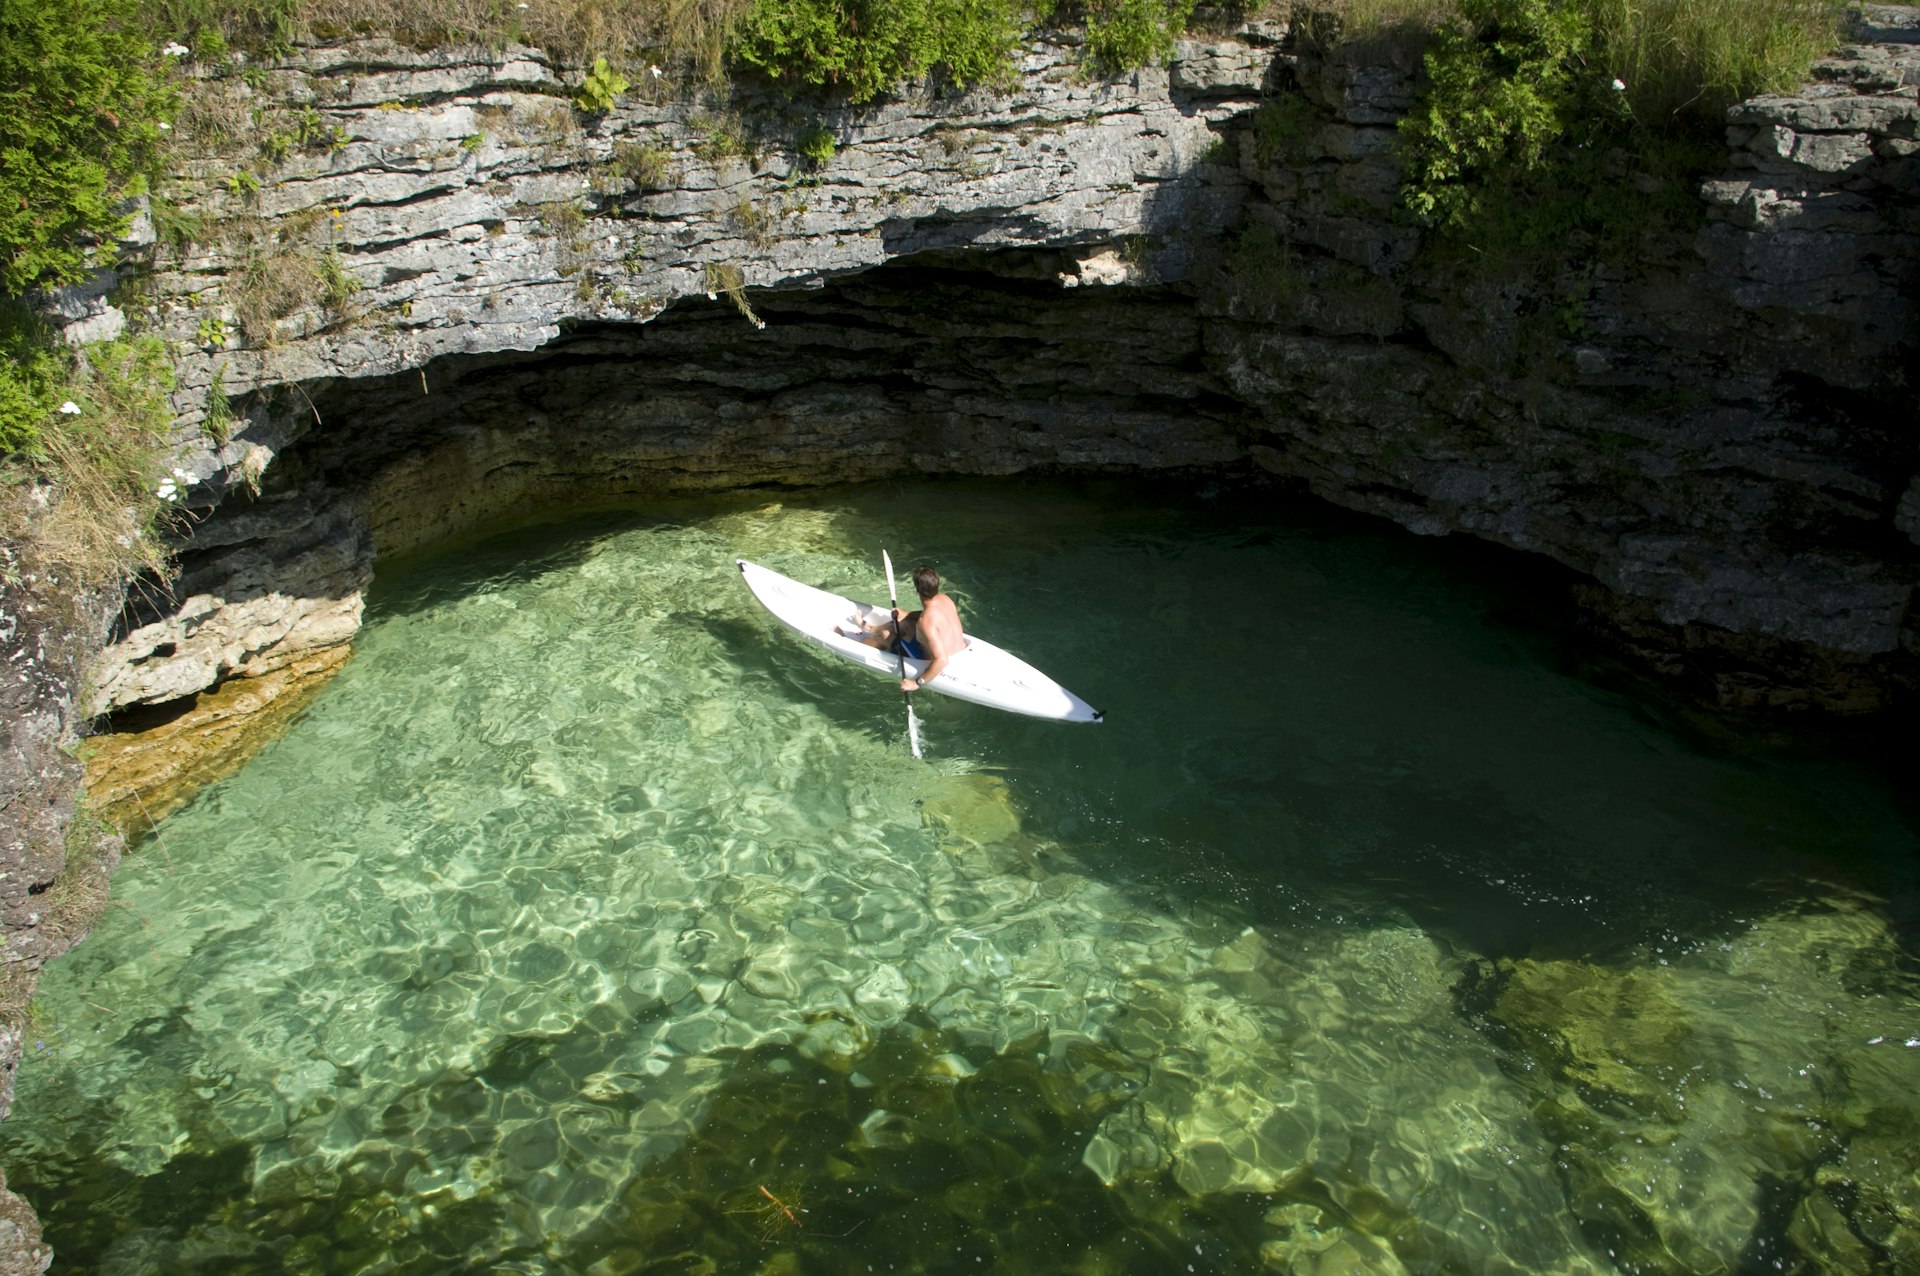 A man kayaks in Cave Point County Park, Lake Michigan, Door County, Wisconsin, Midwest, USA